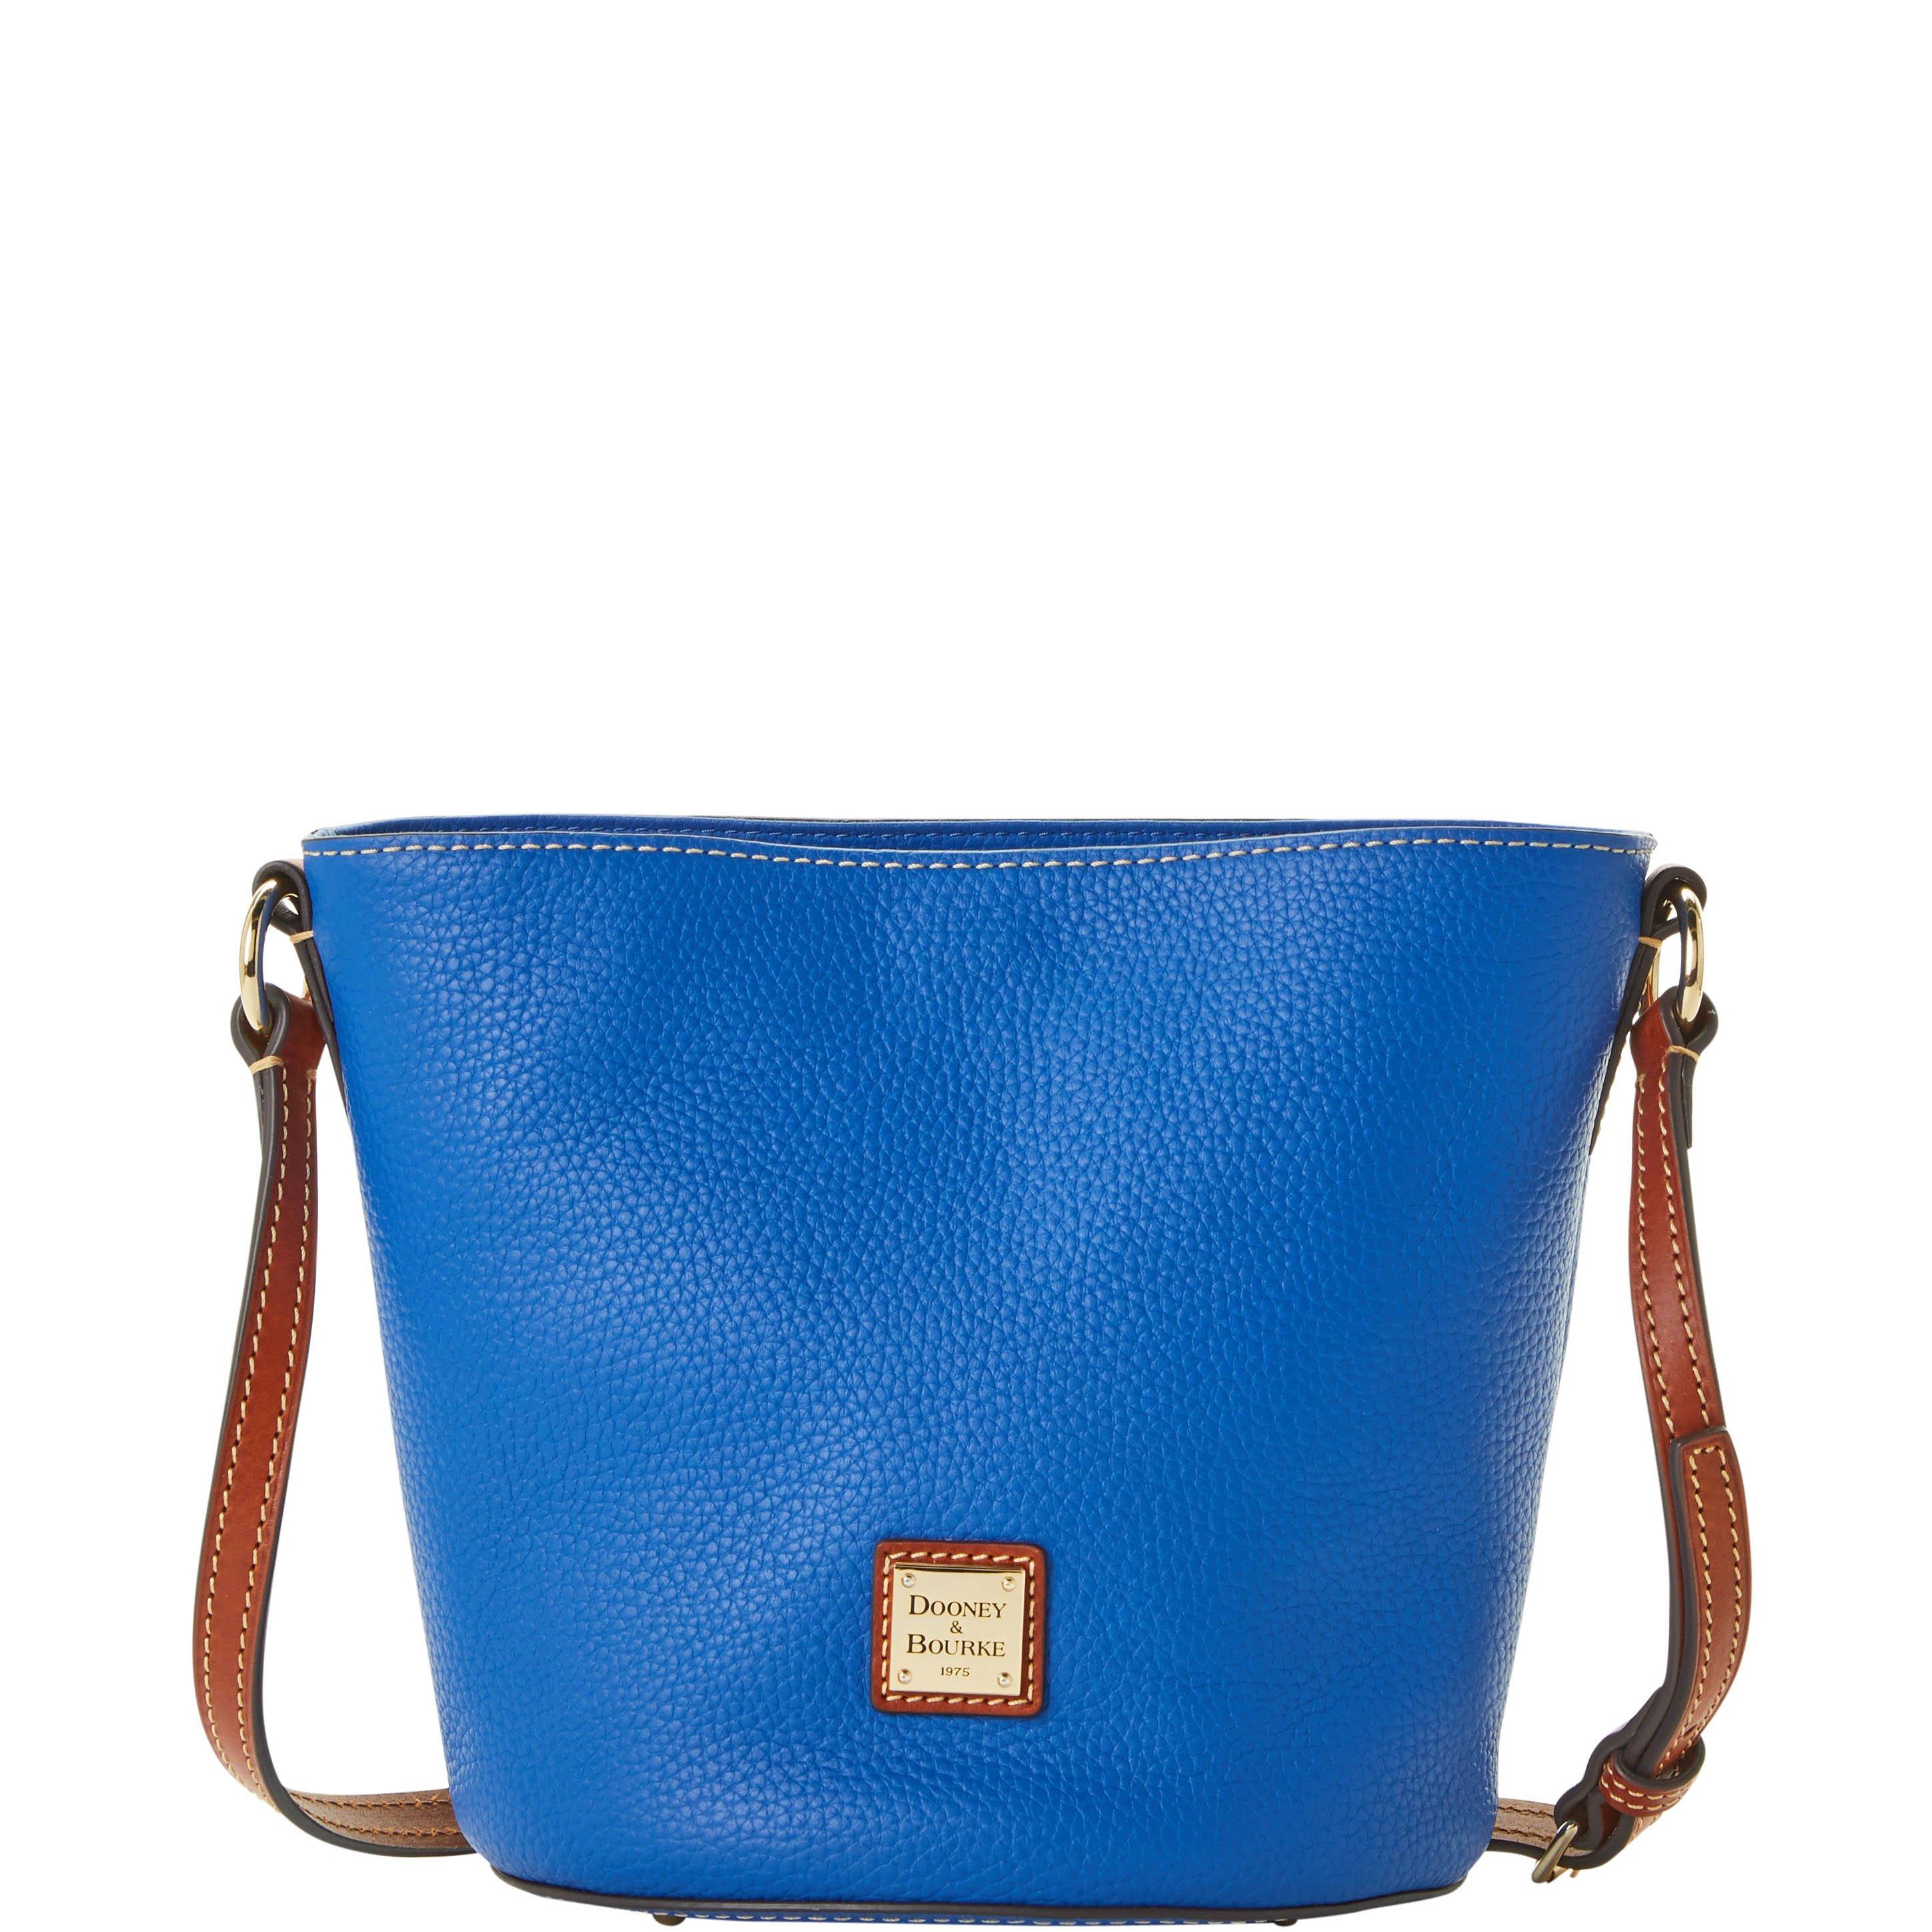 Dooney & Bourke Leather Pebble Grain Small Thea Crossbody in French